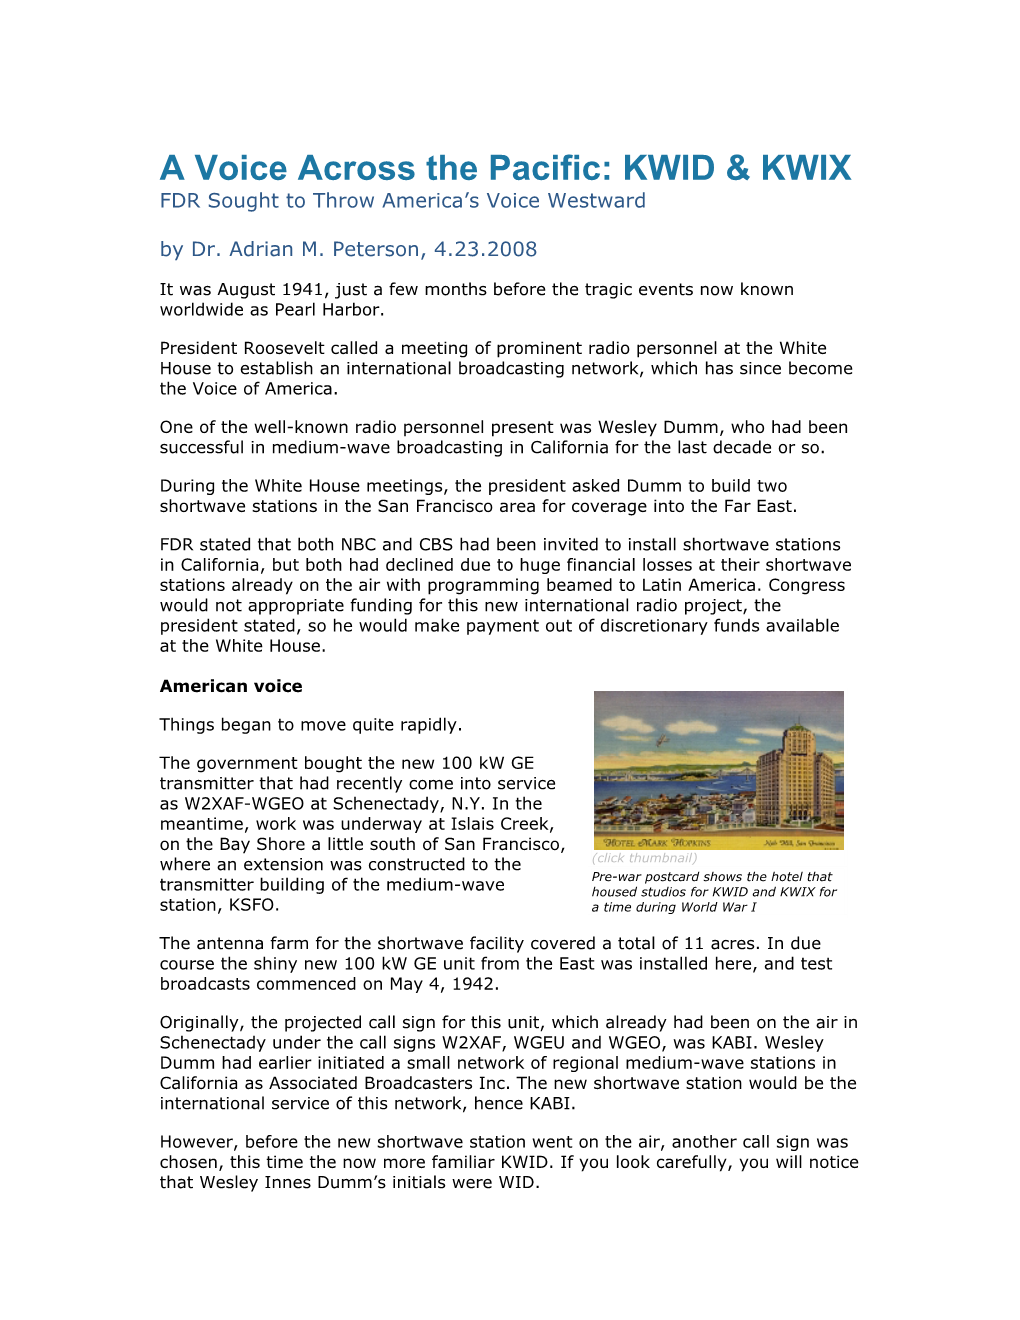 A Voice Across the Pacific: KWID & KWIX FDR Sought to Throw America’S Voice Westward by Dr